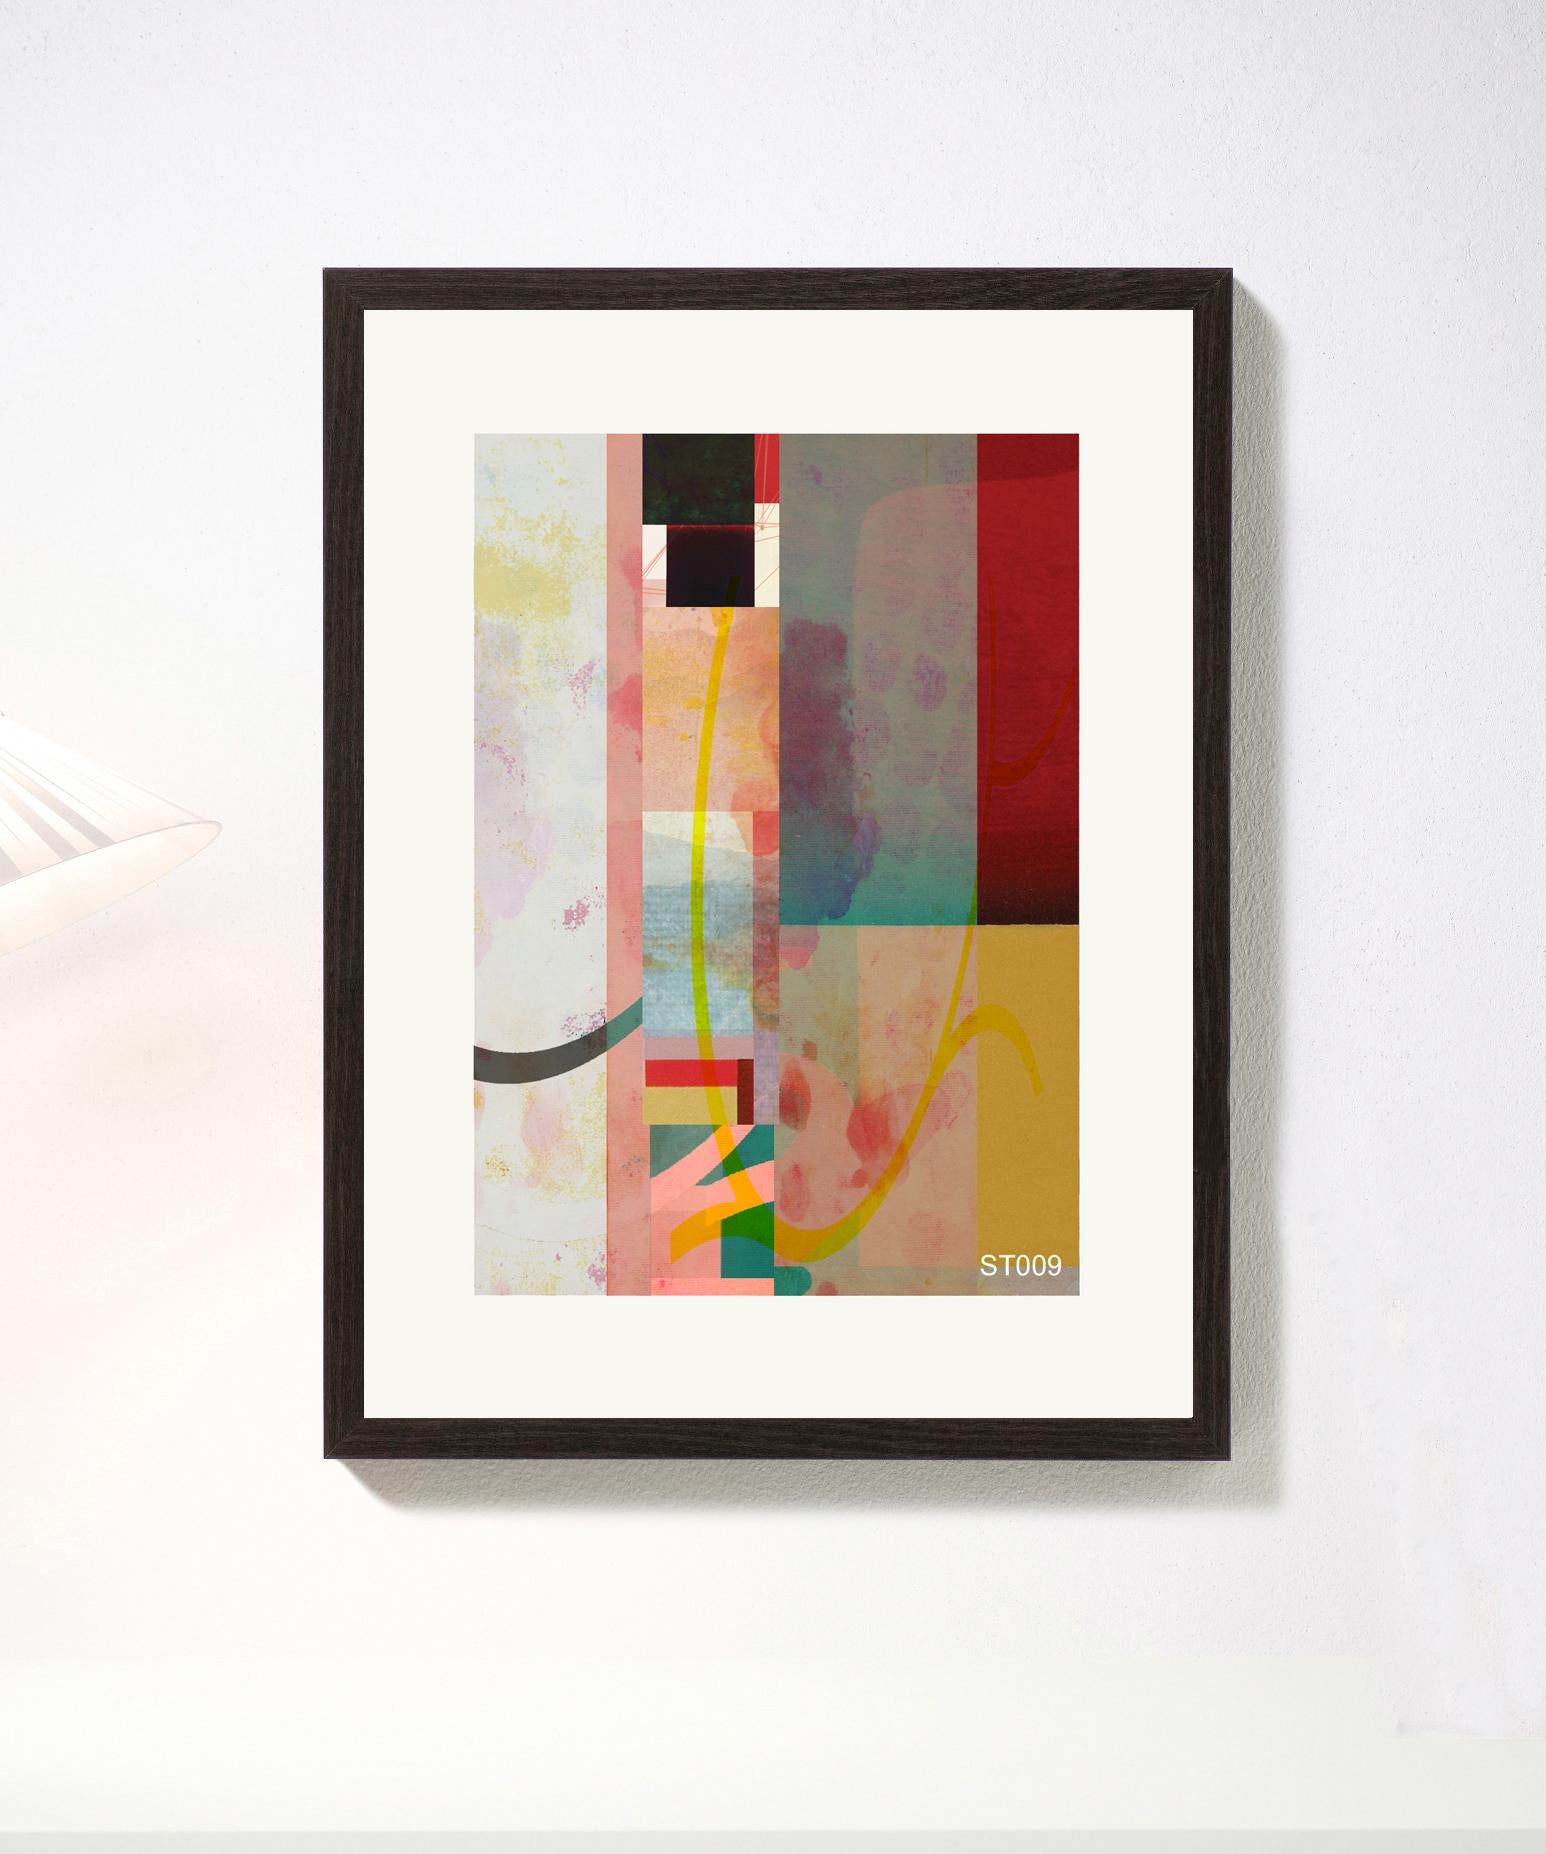 Abstract-Contemporary, Abstract, Expressionism, Modern, Pop art, , Geometric - Print by Francisco Nicolás